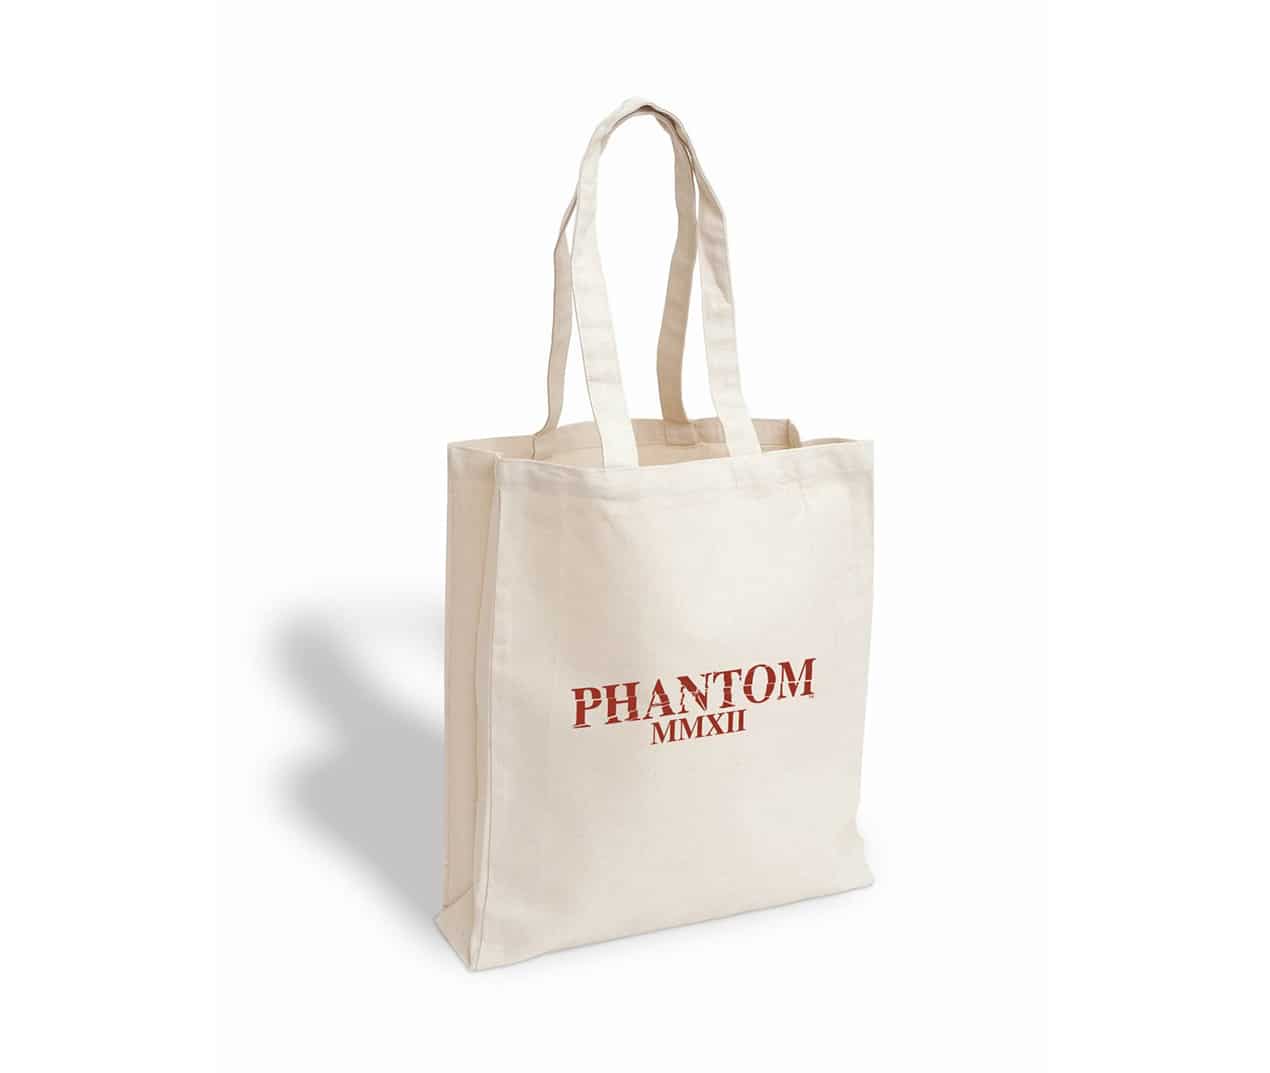 Printed Canvas Bag, Order Eco Printed Canvas Bags For Businesses